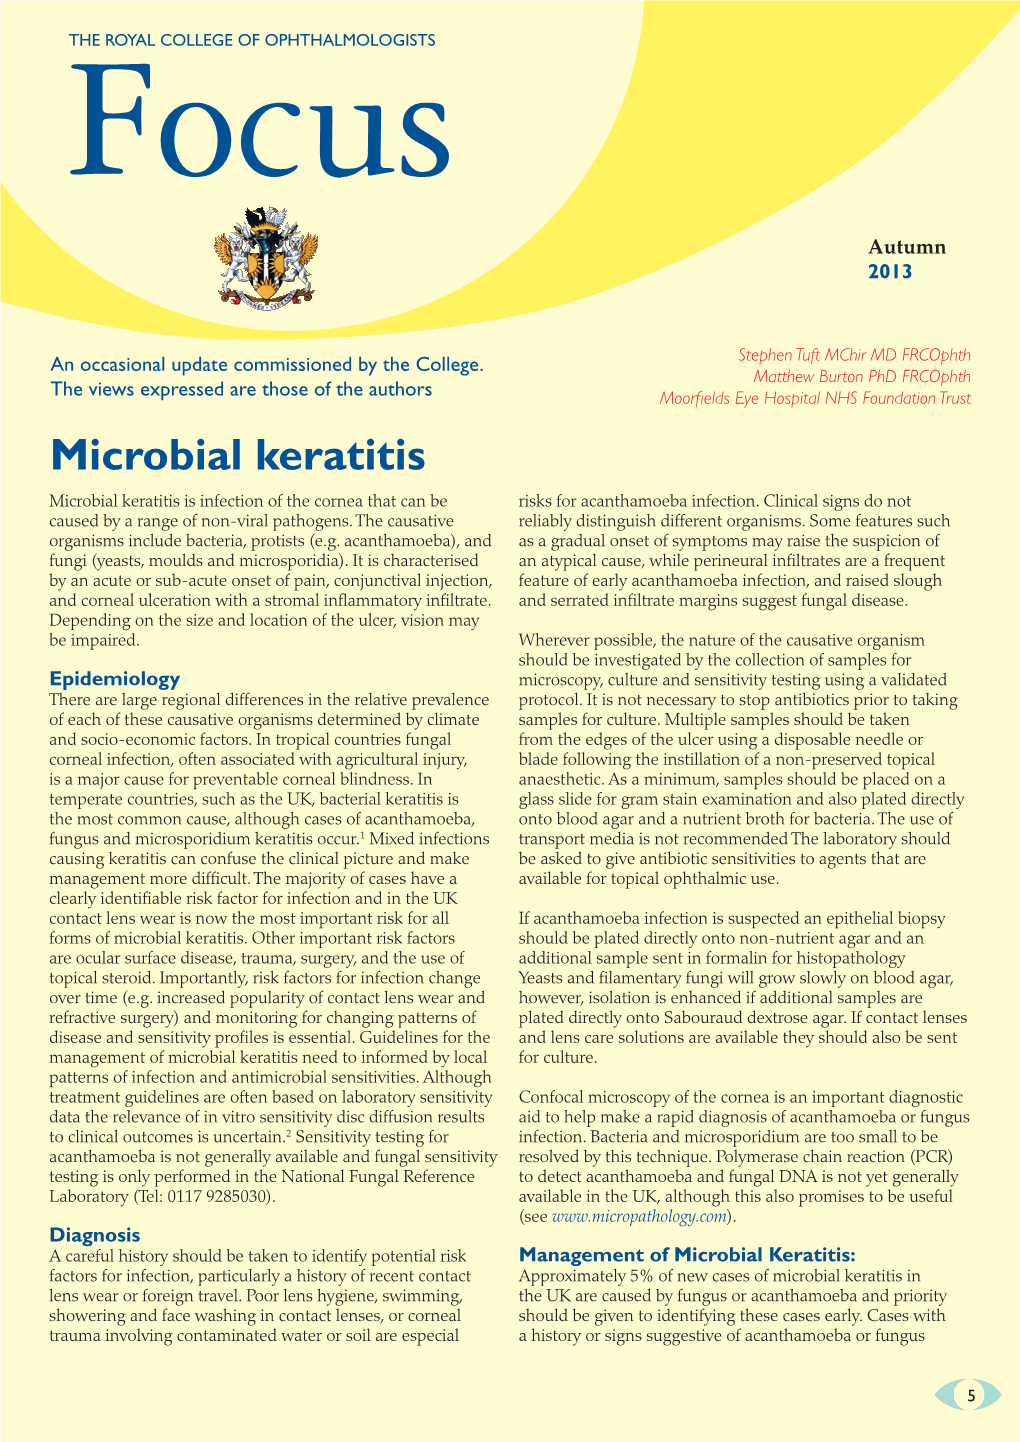 Microbial Keratitis Microbial Keratitis Is Infection of the Cornea That Can Be Risks for Acanthamoeba Infection